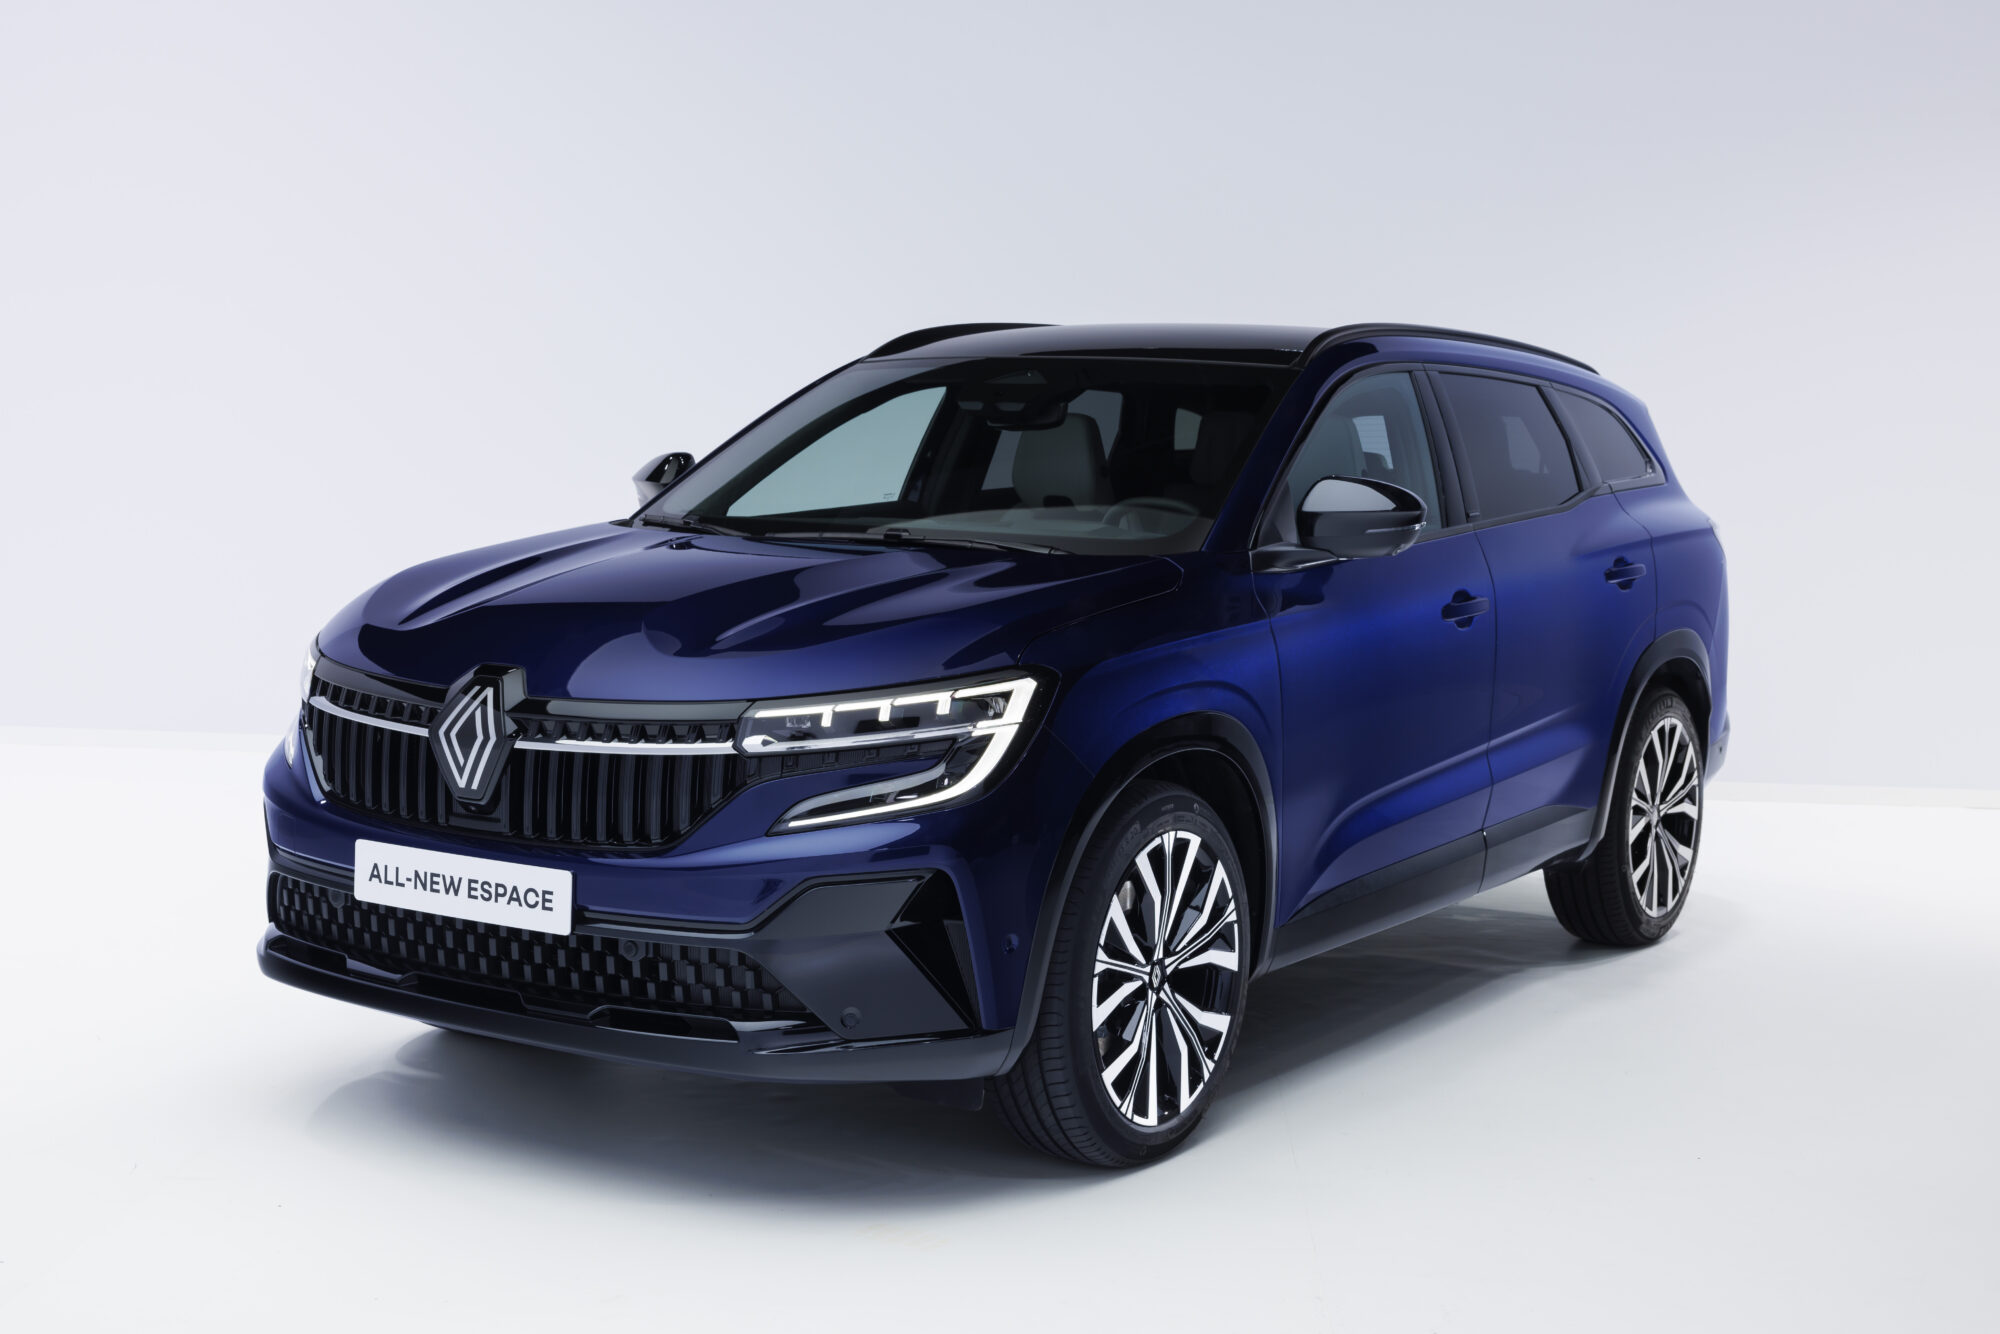 The All-new Renault Espace